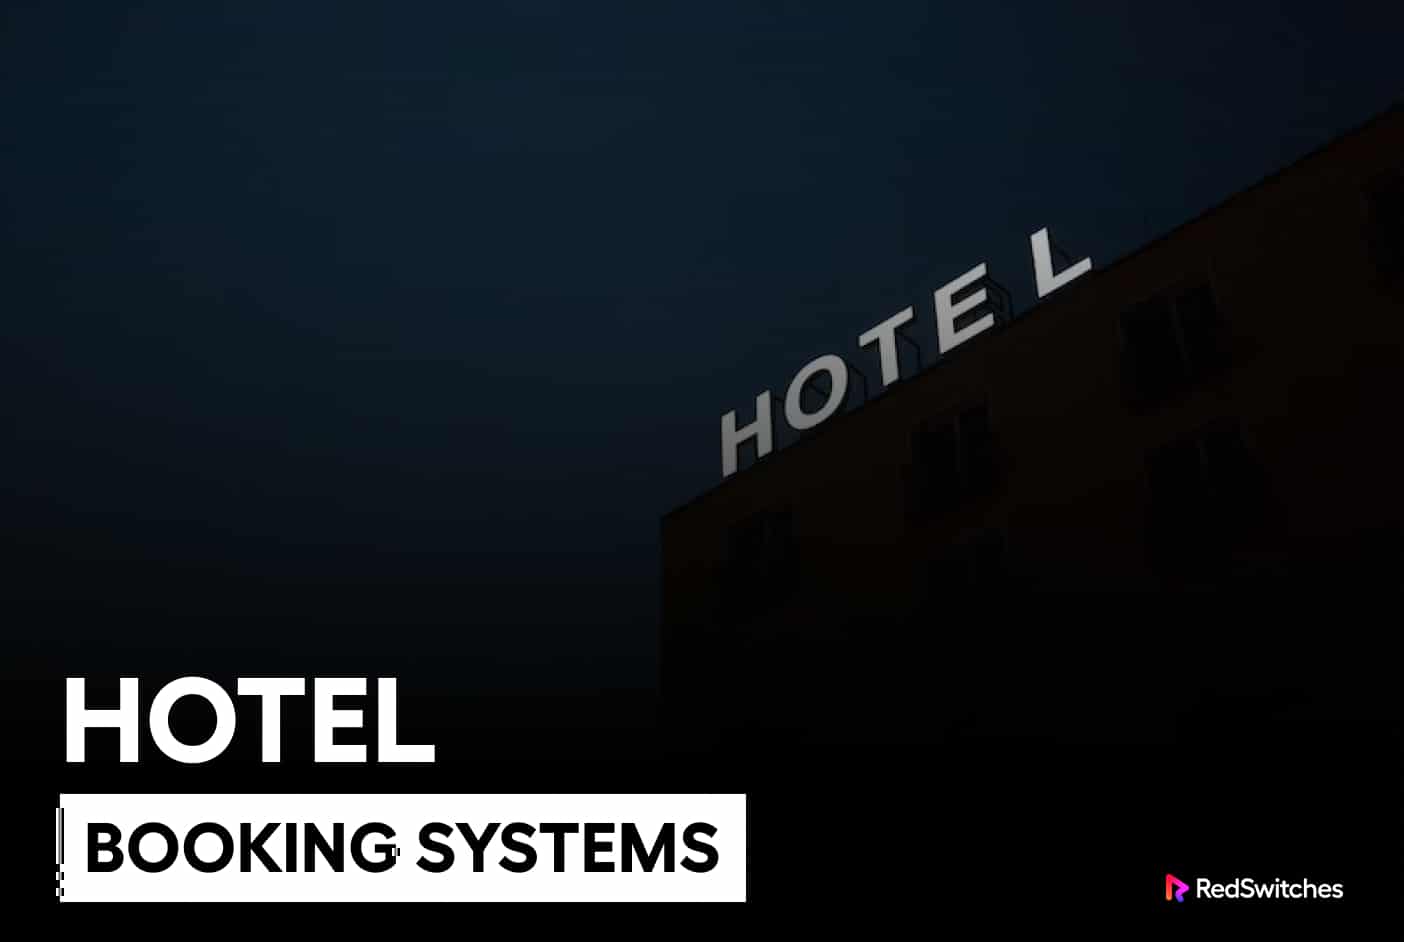 Hotel booking system is a examples of databases